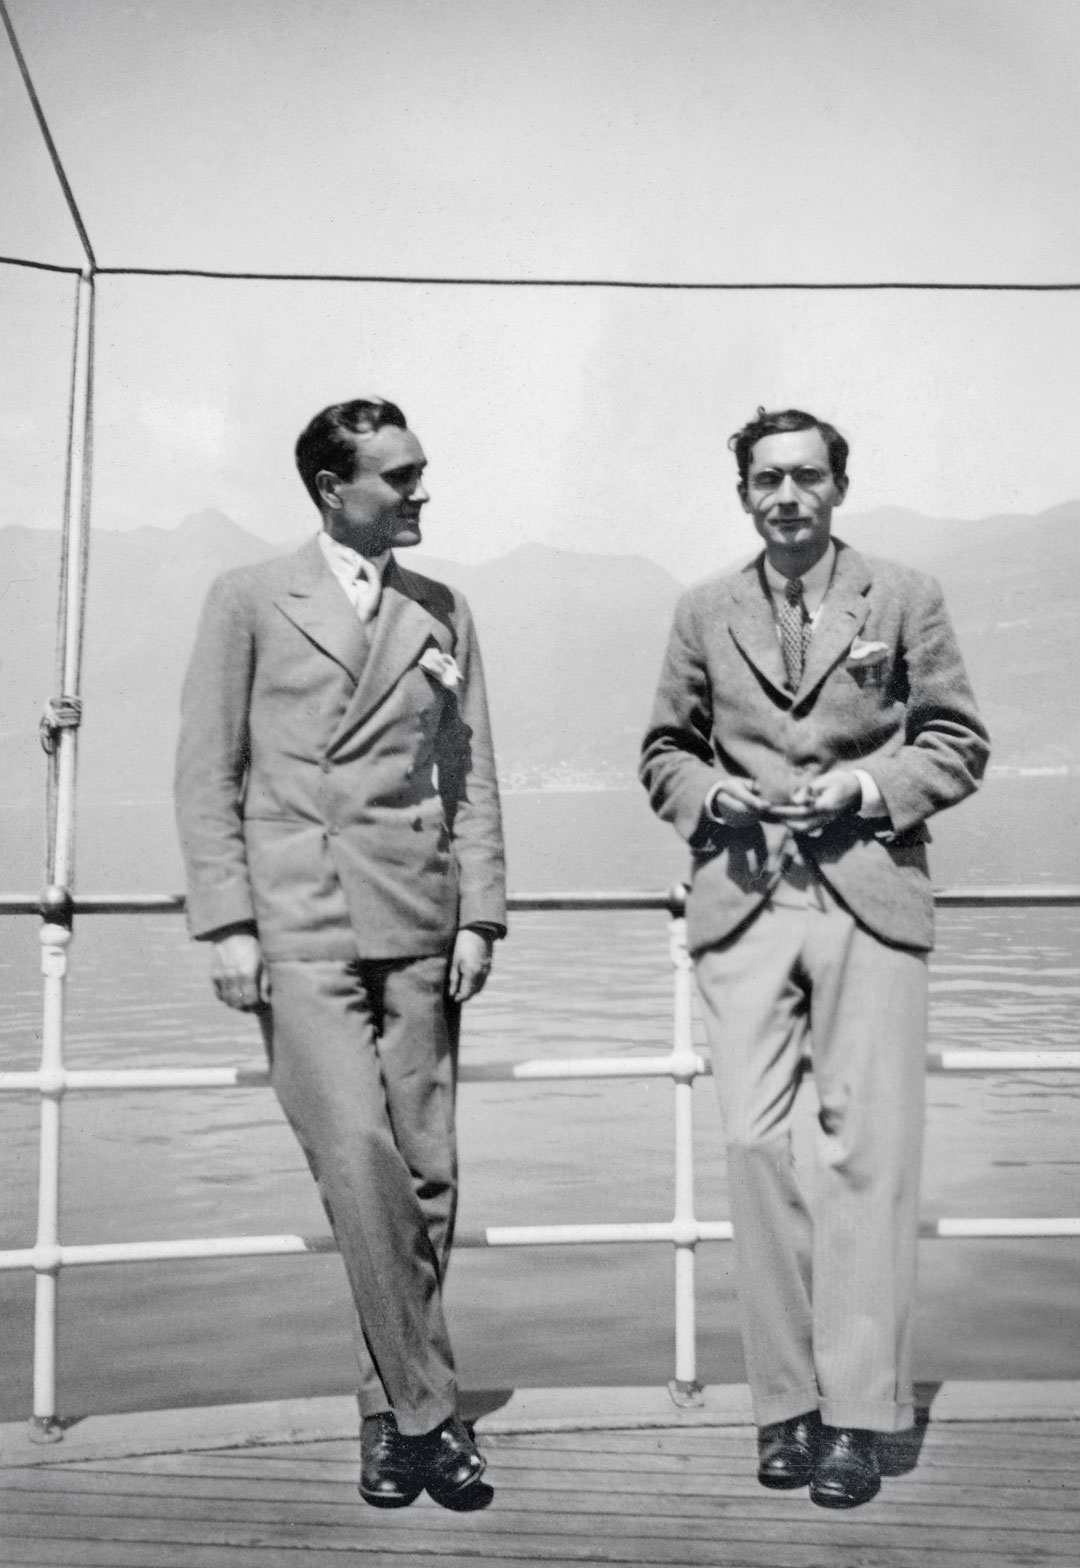 Philip (left) and Alfred H. Barr, Jr. (right), Lake Maggiore, Italy, April 1933. From Philip Johnson: A Visual Biography